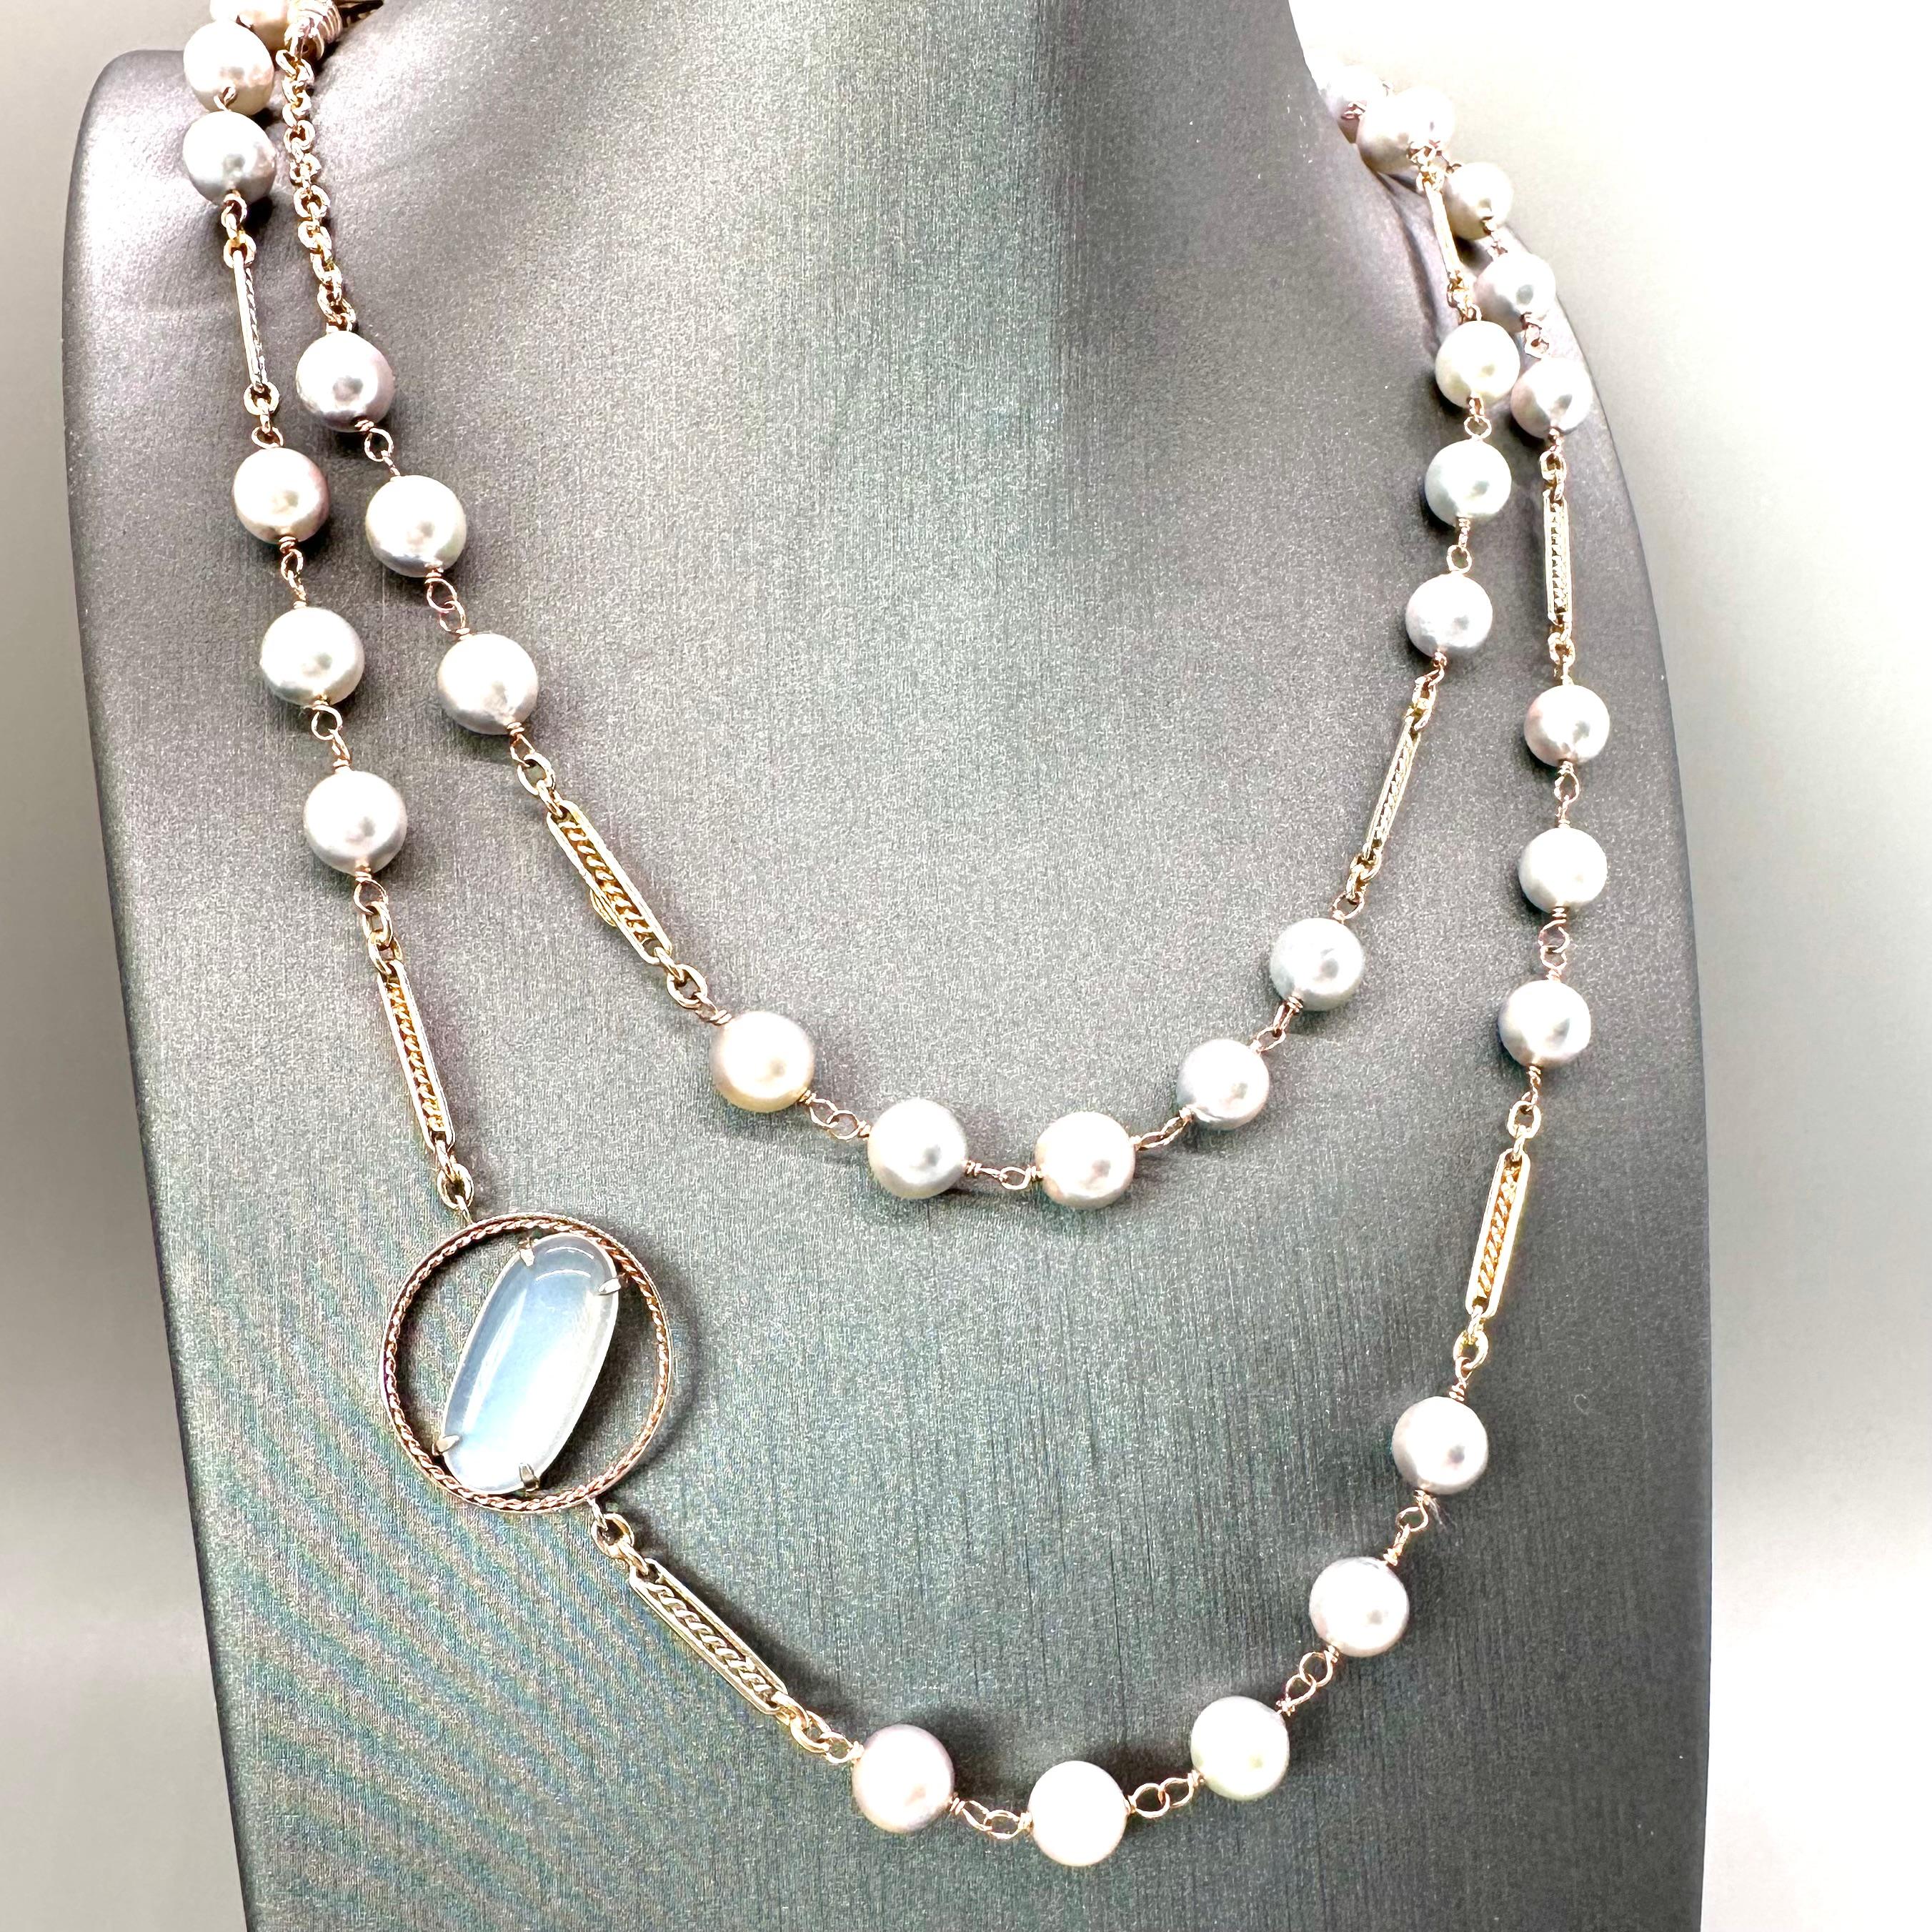 6.61 carat blue moonstone, Akoya pearls on a handmade 14k necklace by G&G Studio For Sale 6